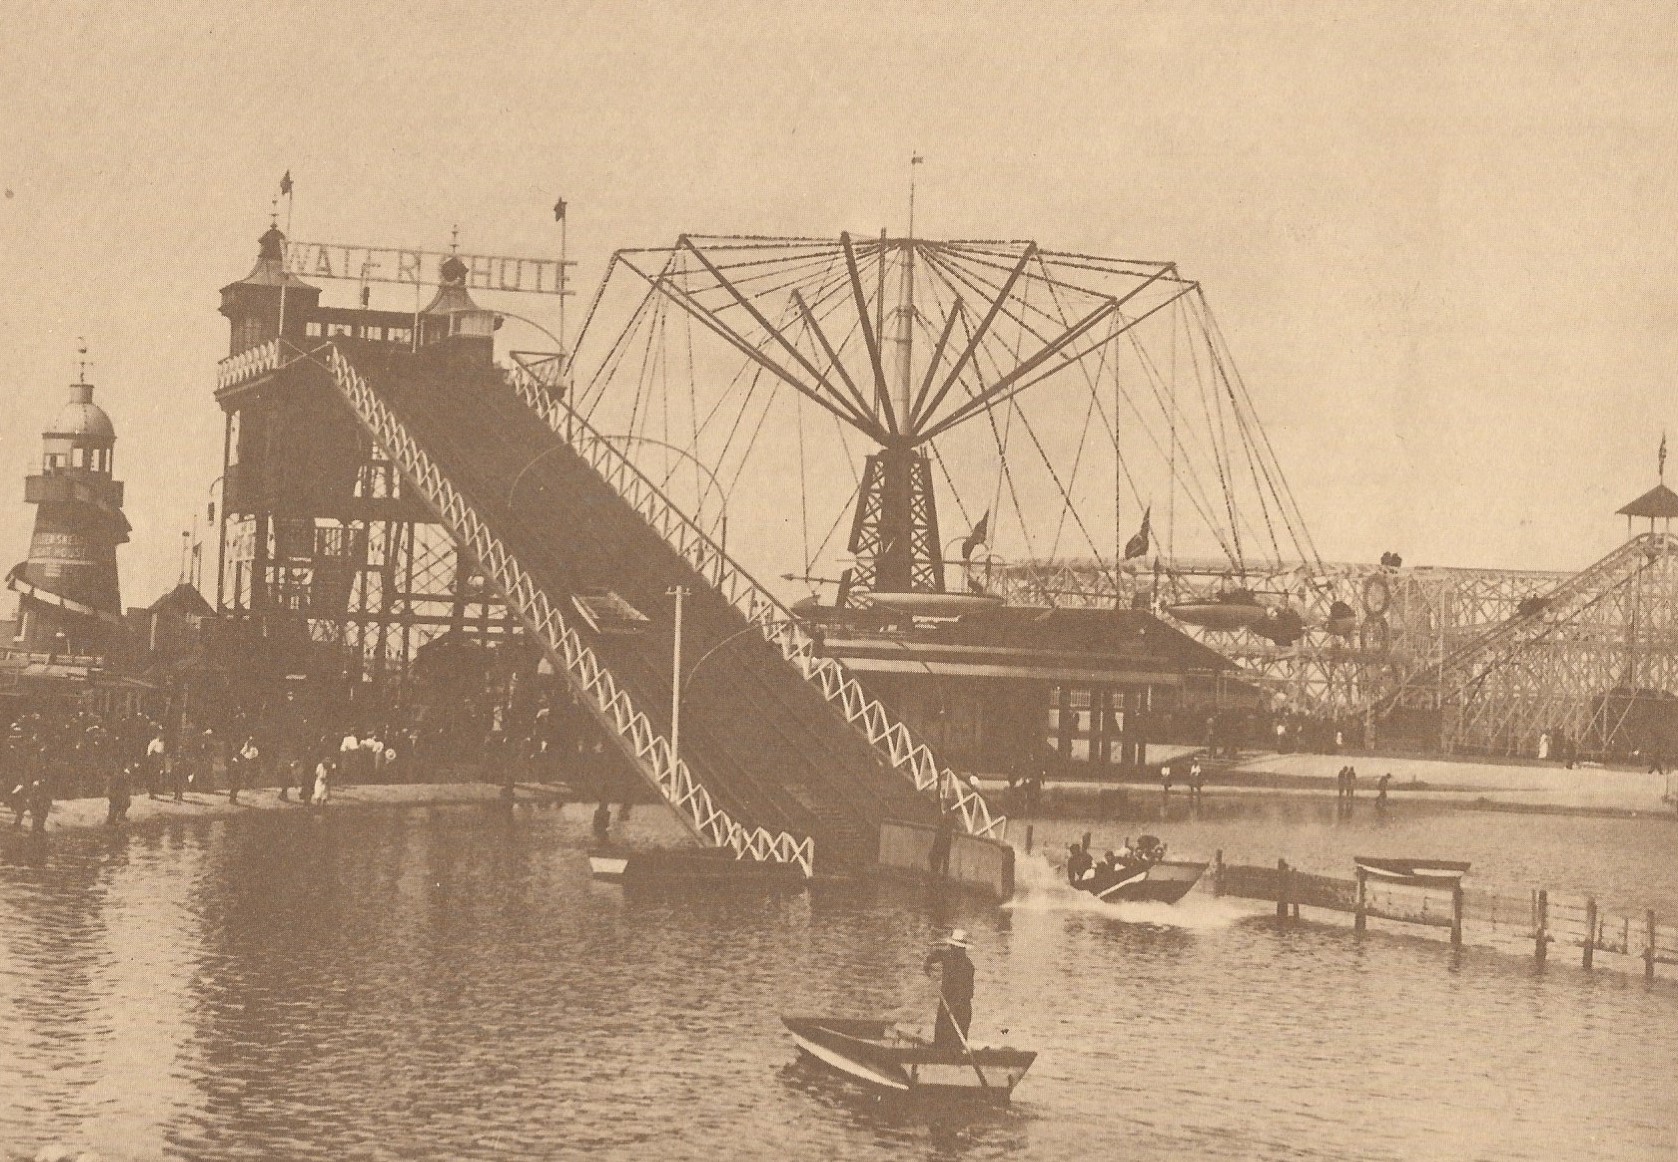 The old Southport fairground was sited around the south end of Marine Lake before it was moved to Pleasureland in 1922. This picture shows the Water Chute, built in 1903, and the Flying Machine, built in 1906, before Kings Gardens were opened in 1913. Today, thousands of visitors enjoy their days out at Southport Pleasureland every year.